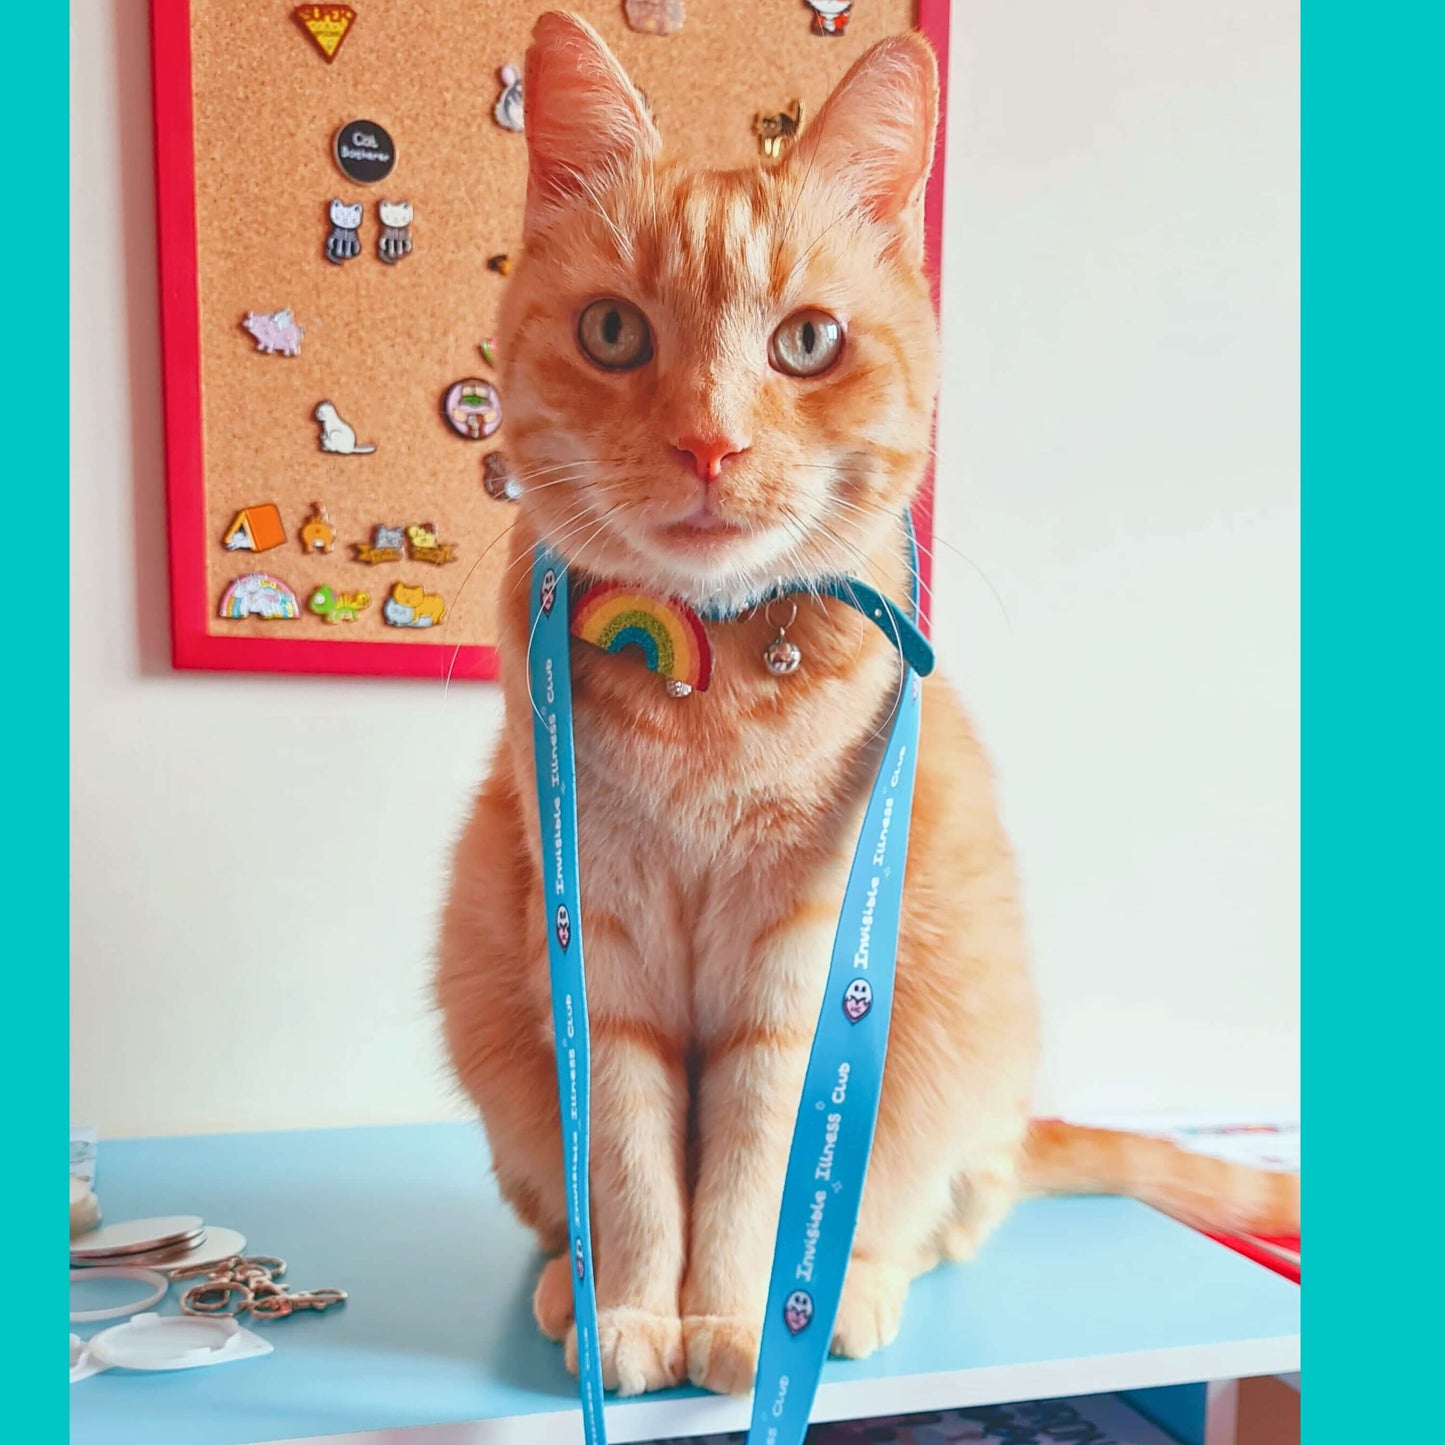 The Invisible Illness Club Lanyard being modelled by Nikky's orange cat. The pastel blue lanyard has repeating white text reading 'invisible illness club' and innabox pastel ghost logo. It has a silver lobster clip and white safety break. The hand drawn design is raising awareness for hidden disabilities.